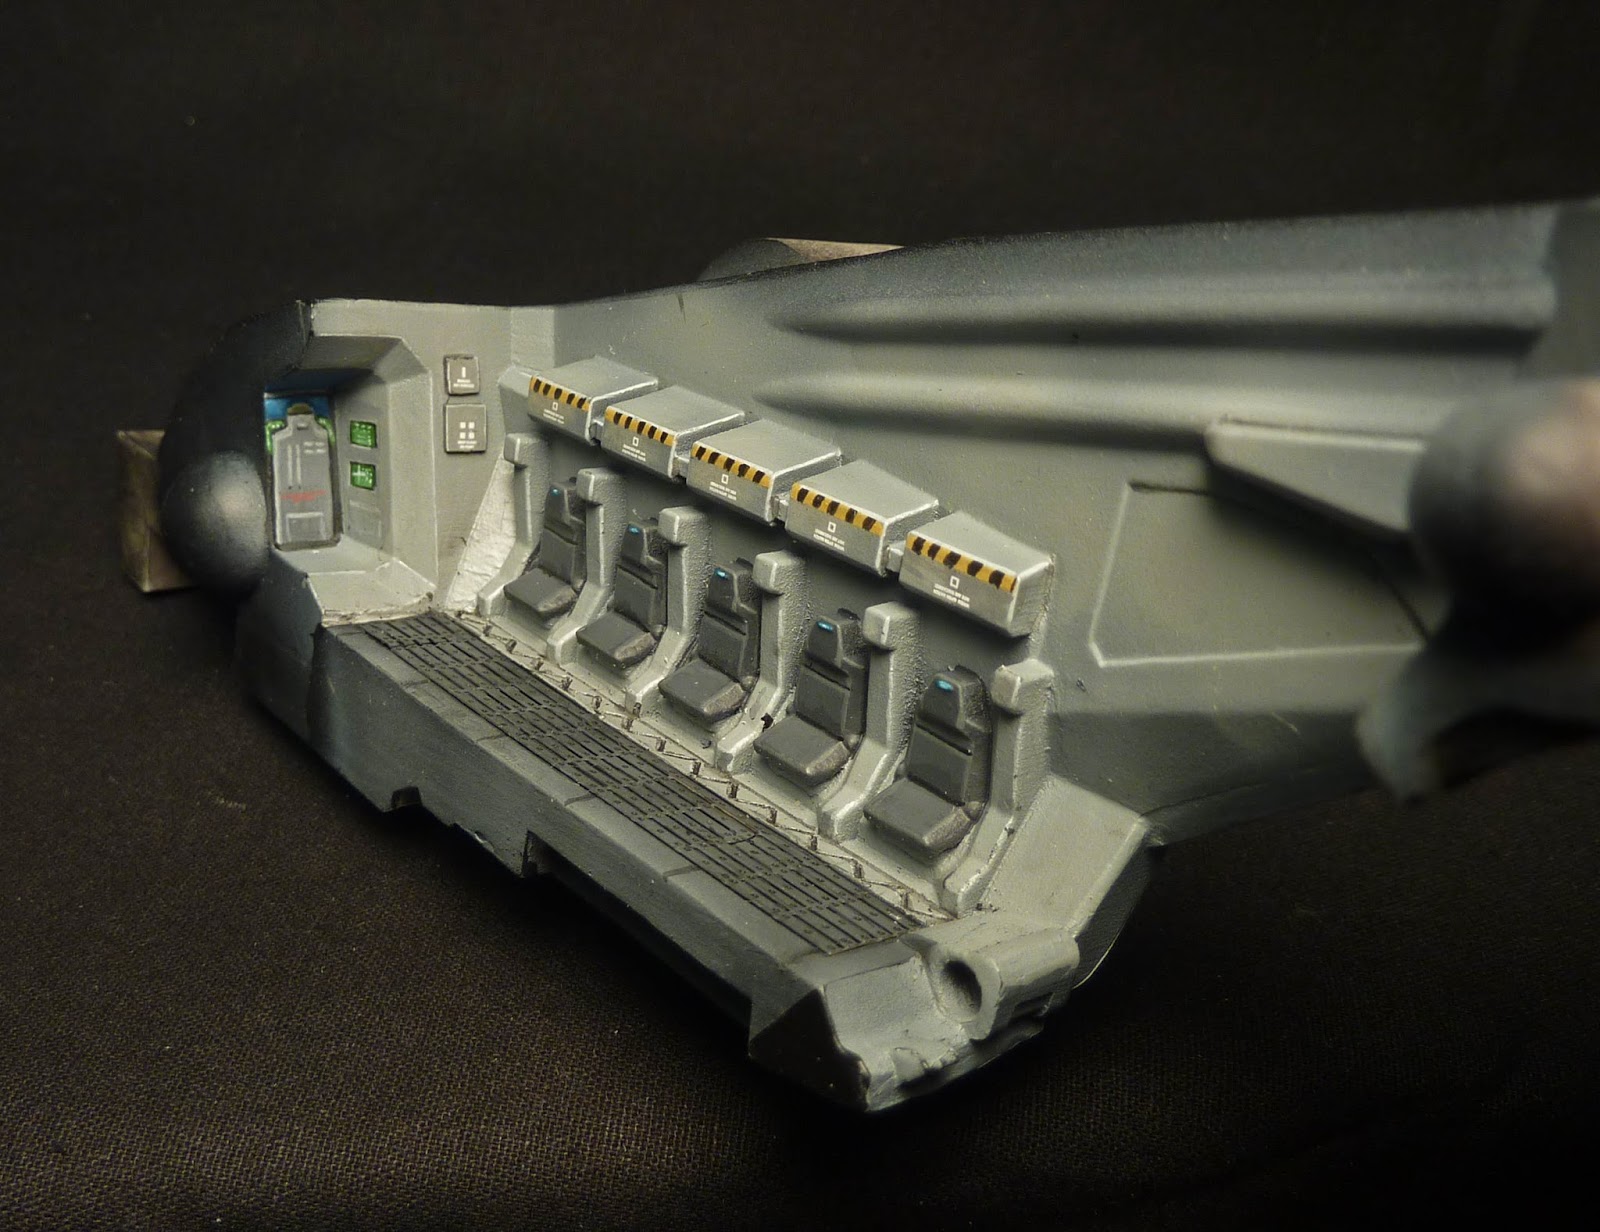 dwartist's painting blog: WIP: Spartan Games Halo 'Pelican' Dropship...